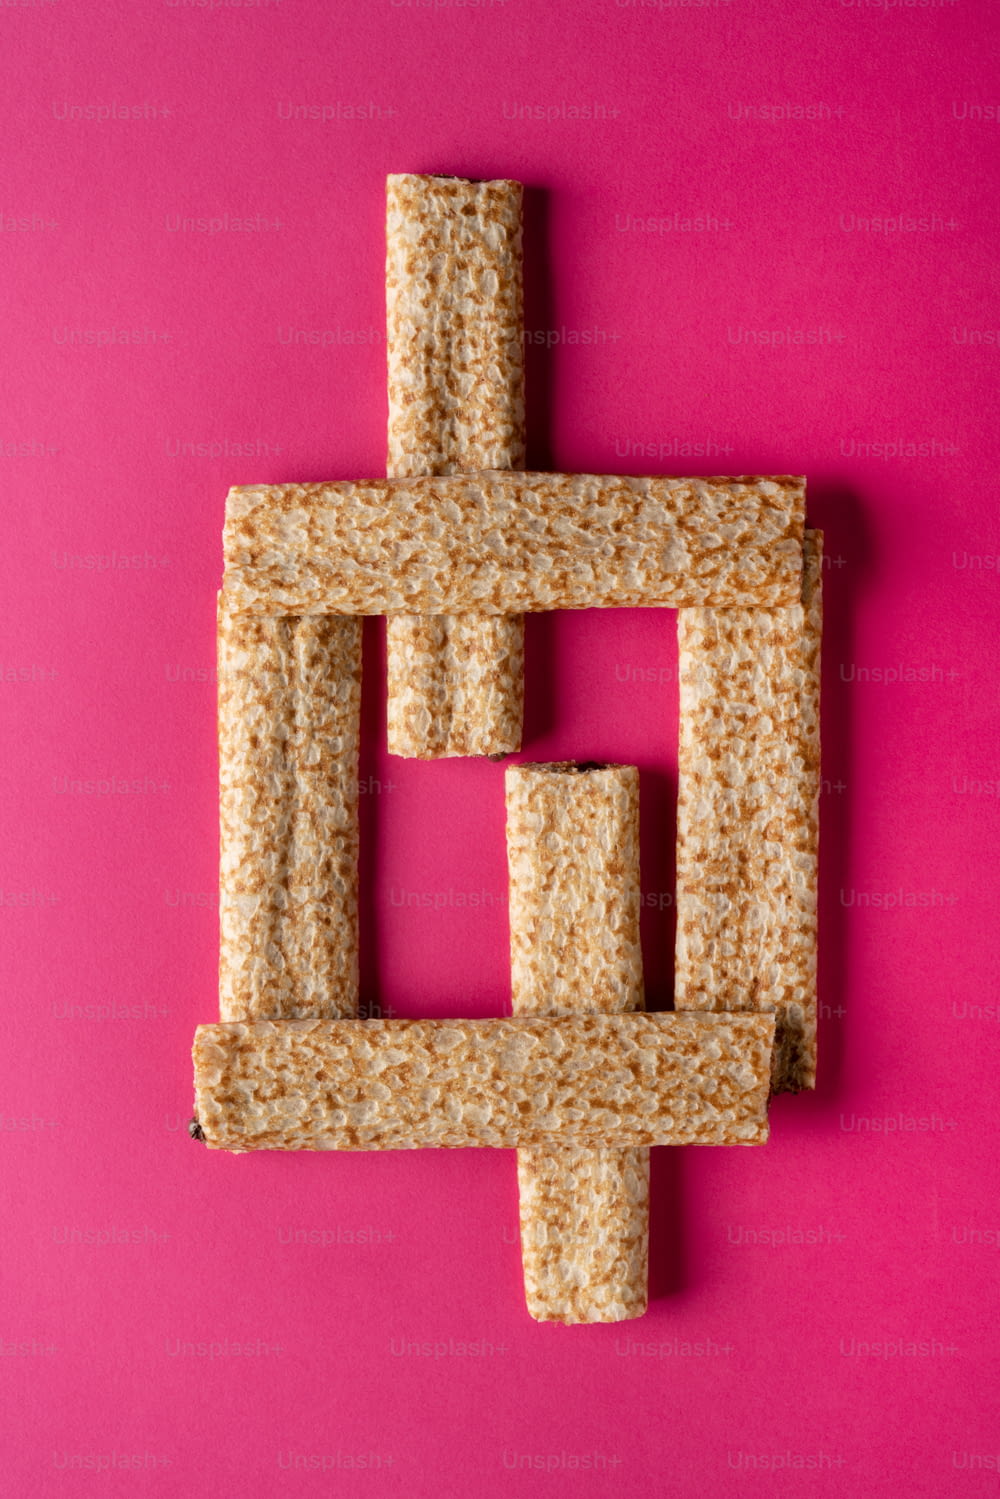 a piece of food that is shaped like a cross